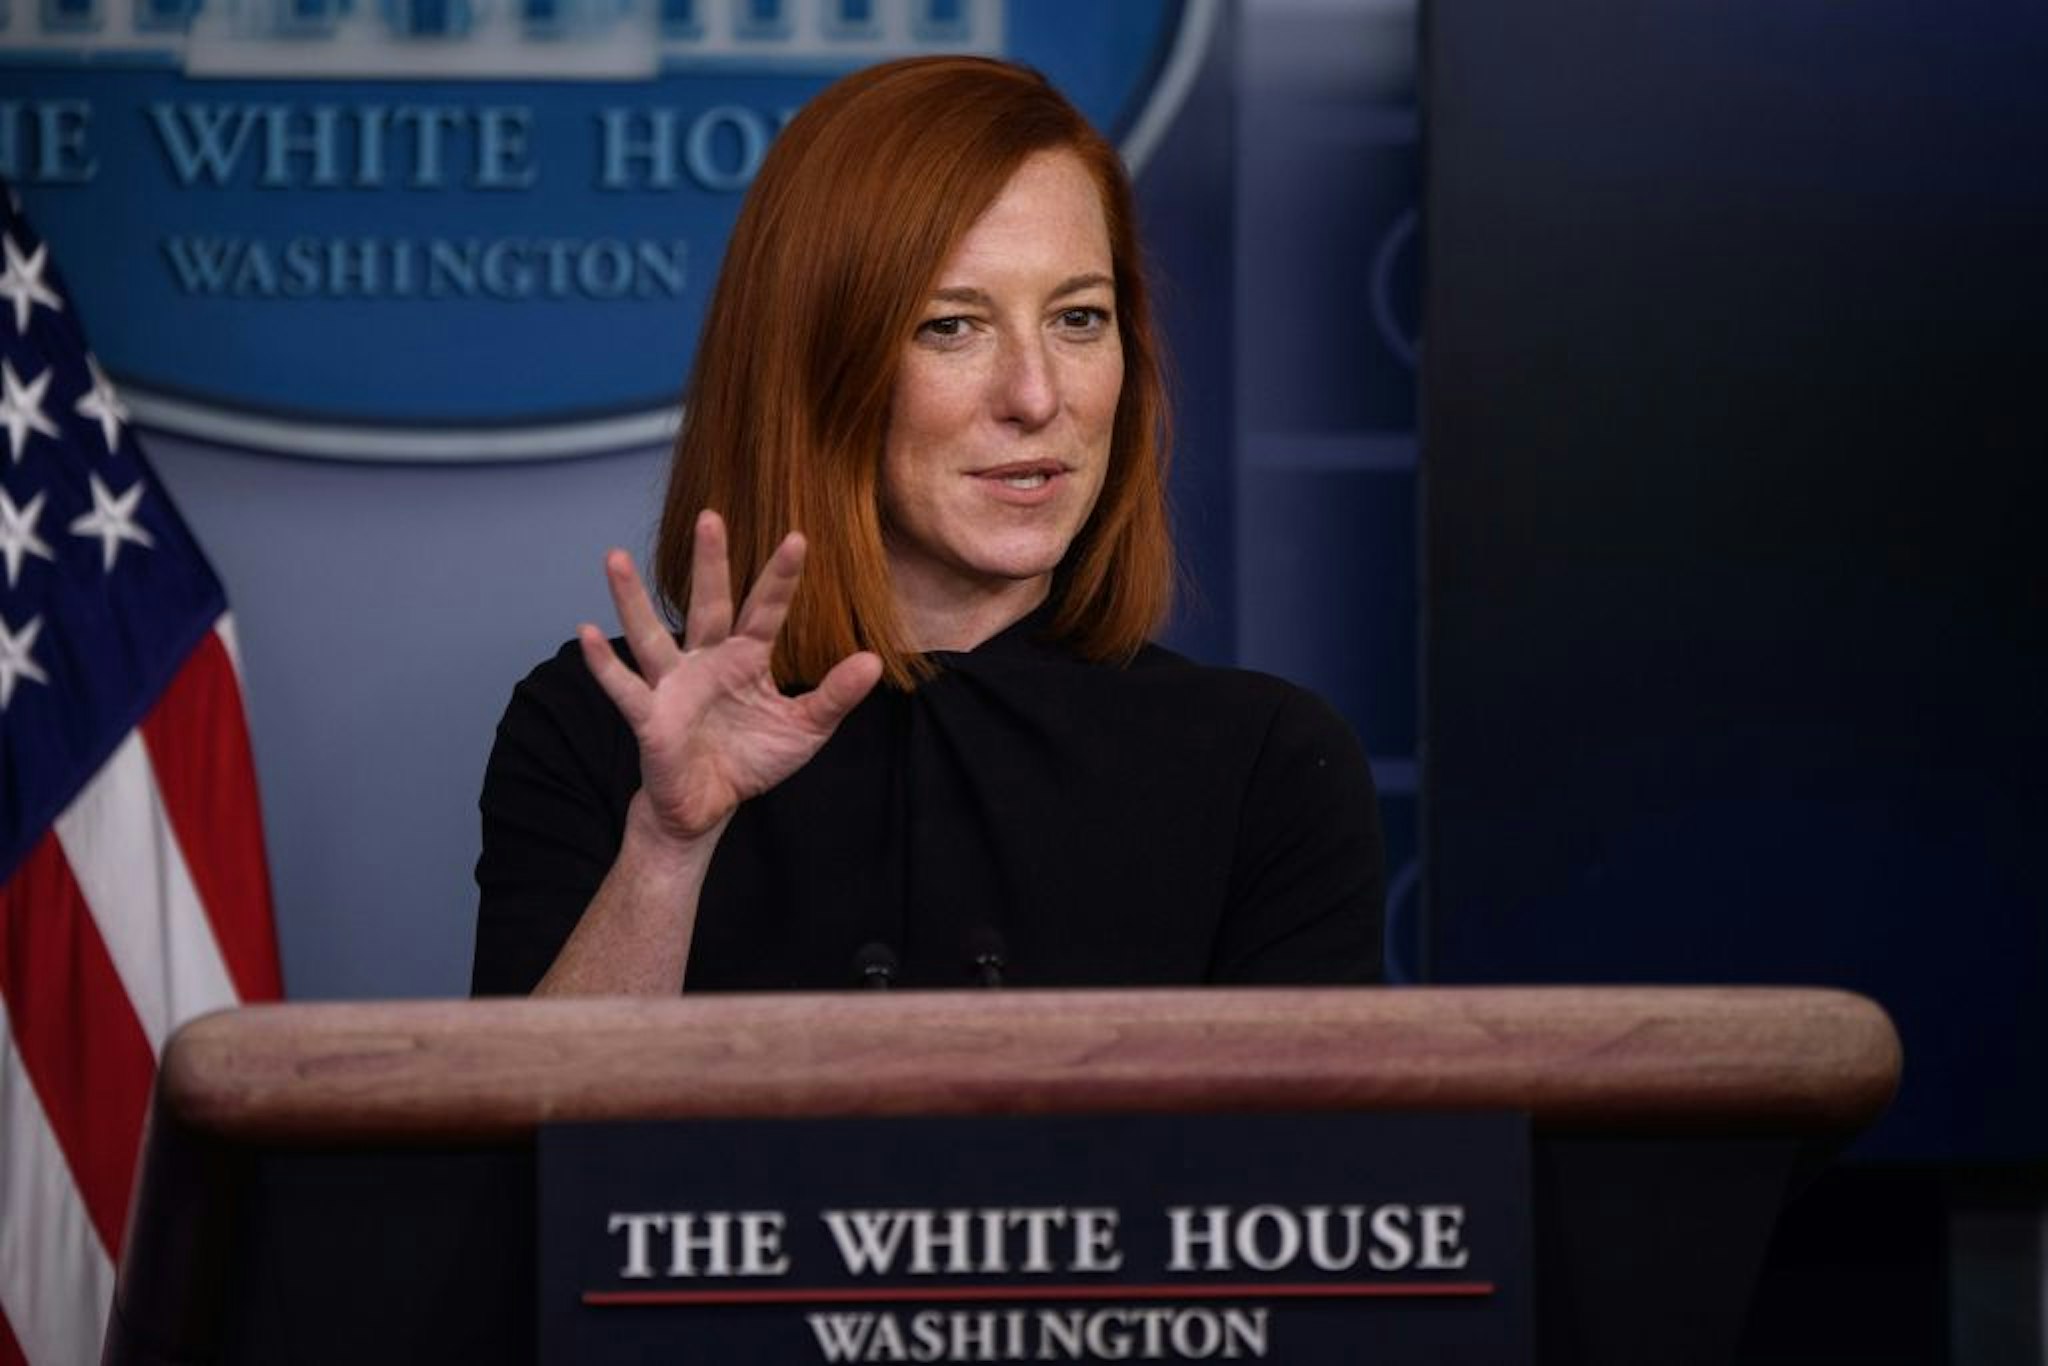 White House Press Secretary Jen Psaki speaks during a press briefing on January 22, 2021, in the Brady Briefing Room of the White House in Washington, DC. (Photo by NICHOLAS KAMM / AFP) (Photo by NICHOLAS KAMM/AFP via Getty Images)